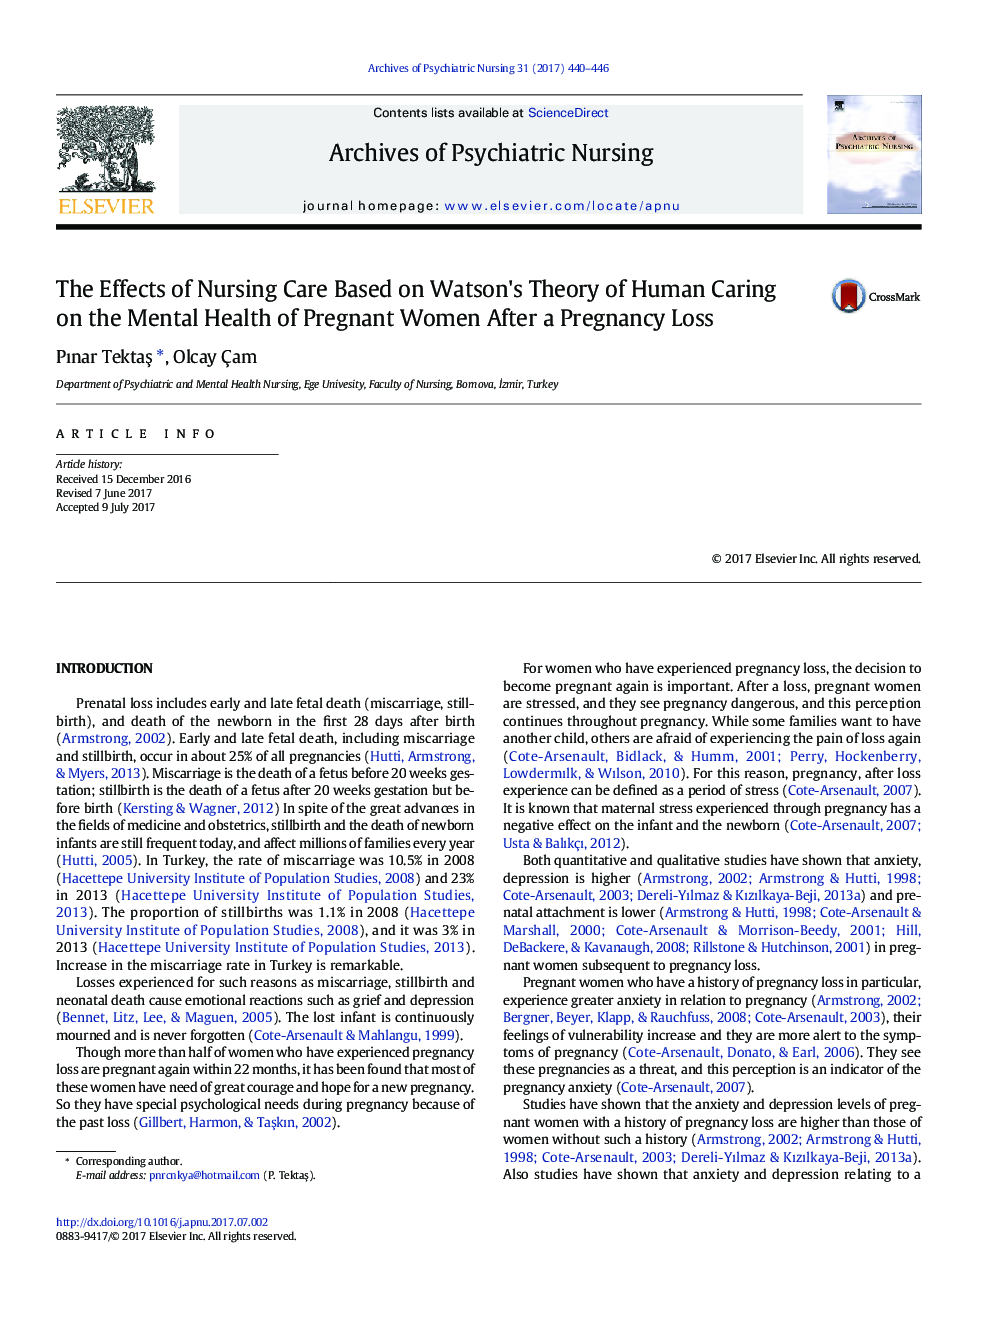 The Effects of Nursing Care Based on Watson's Theory of Human Caring on the Mental Health of Pregnant Women After a Pregnancy Loss